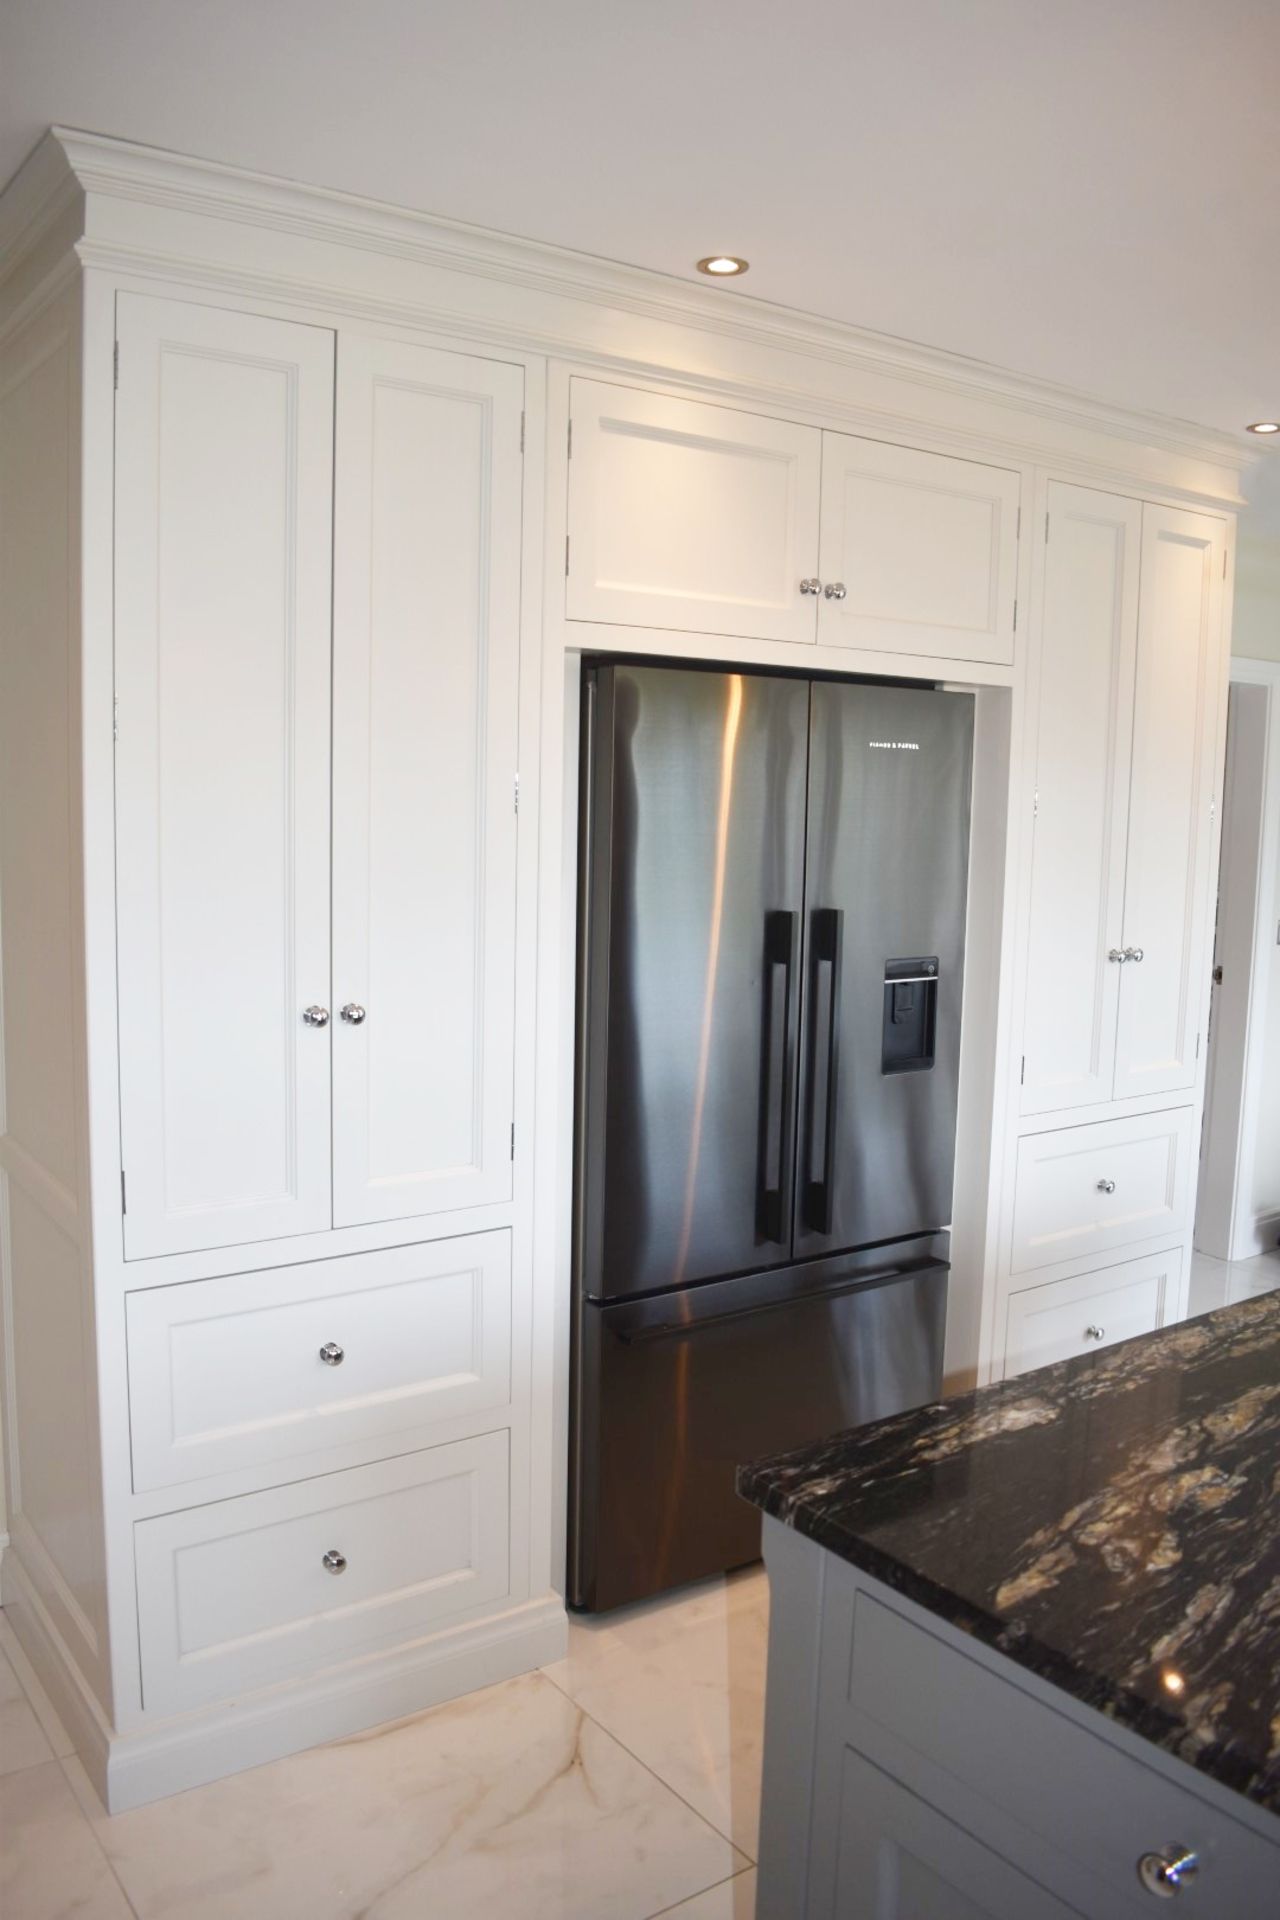 1 x Bespoke Handmade Framed Fitted Kitchen By Matthew Marsden Furniture - Features Hand Painted - Image 5 of 97